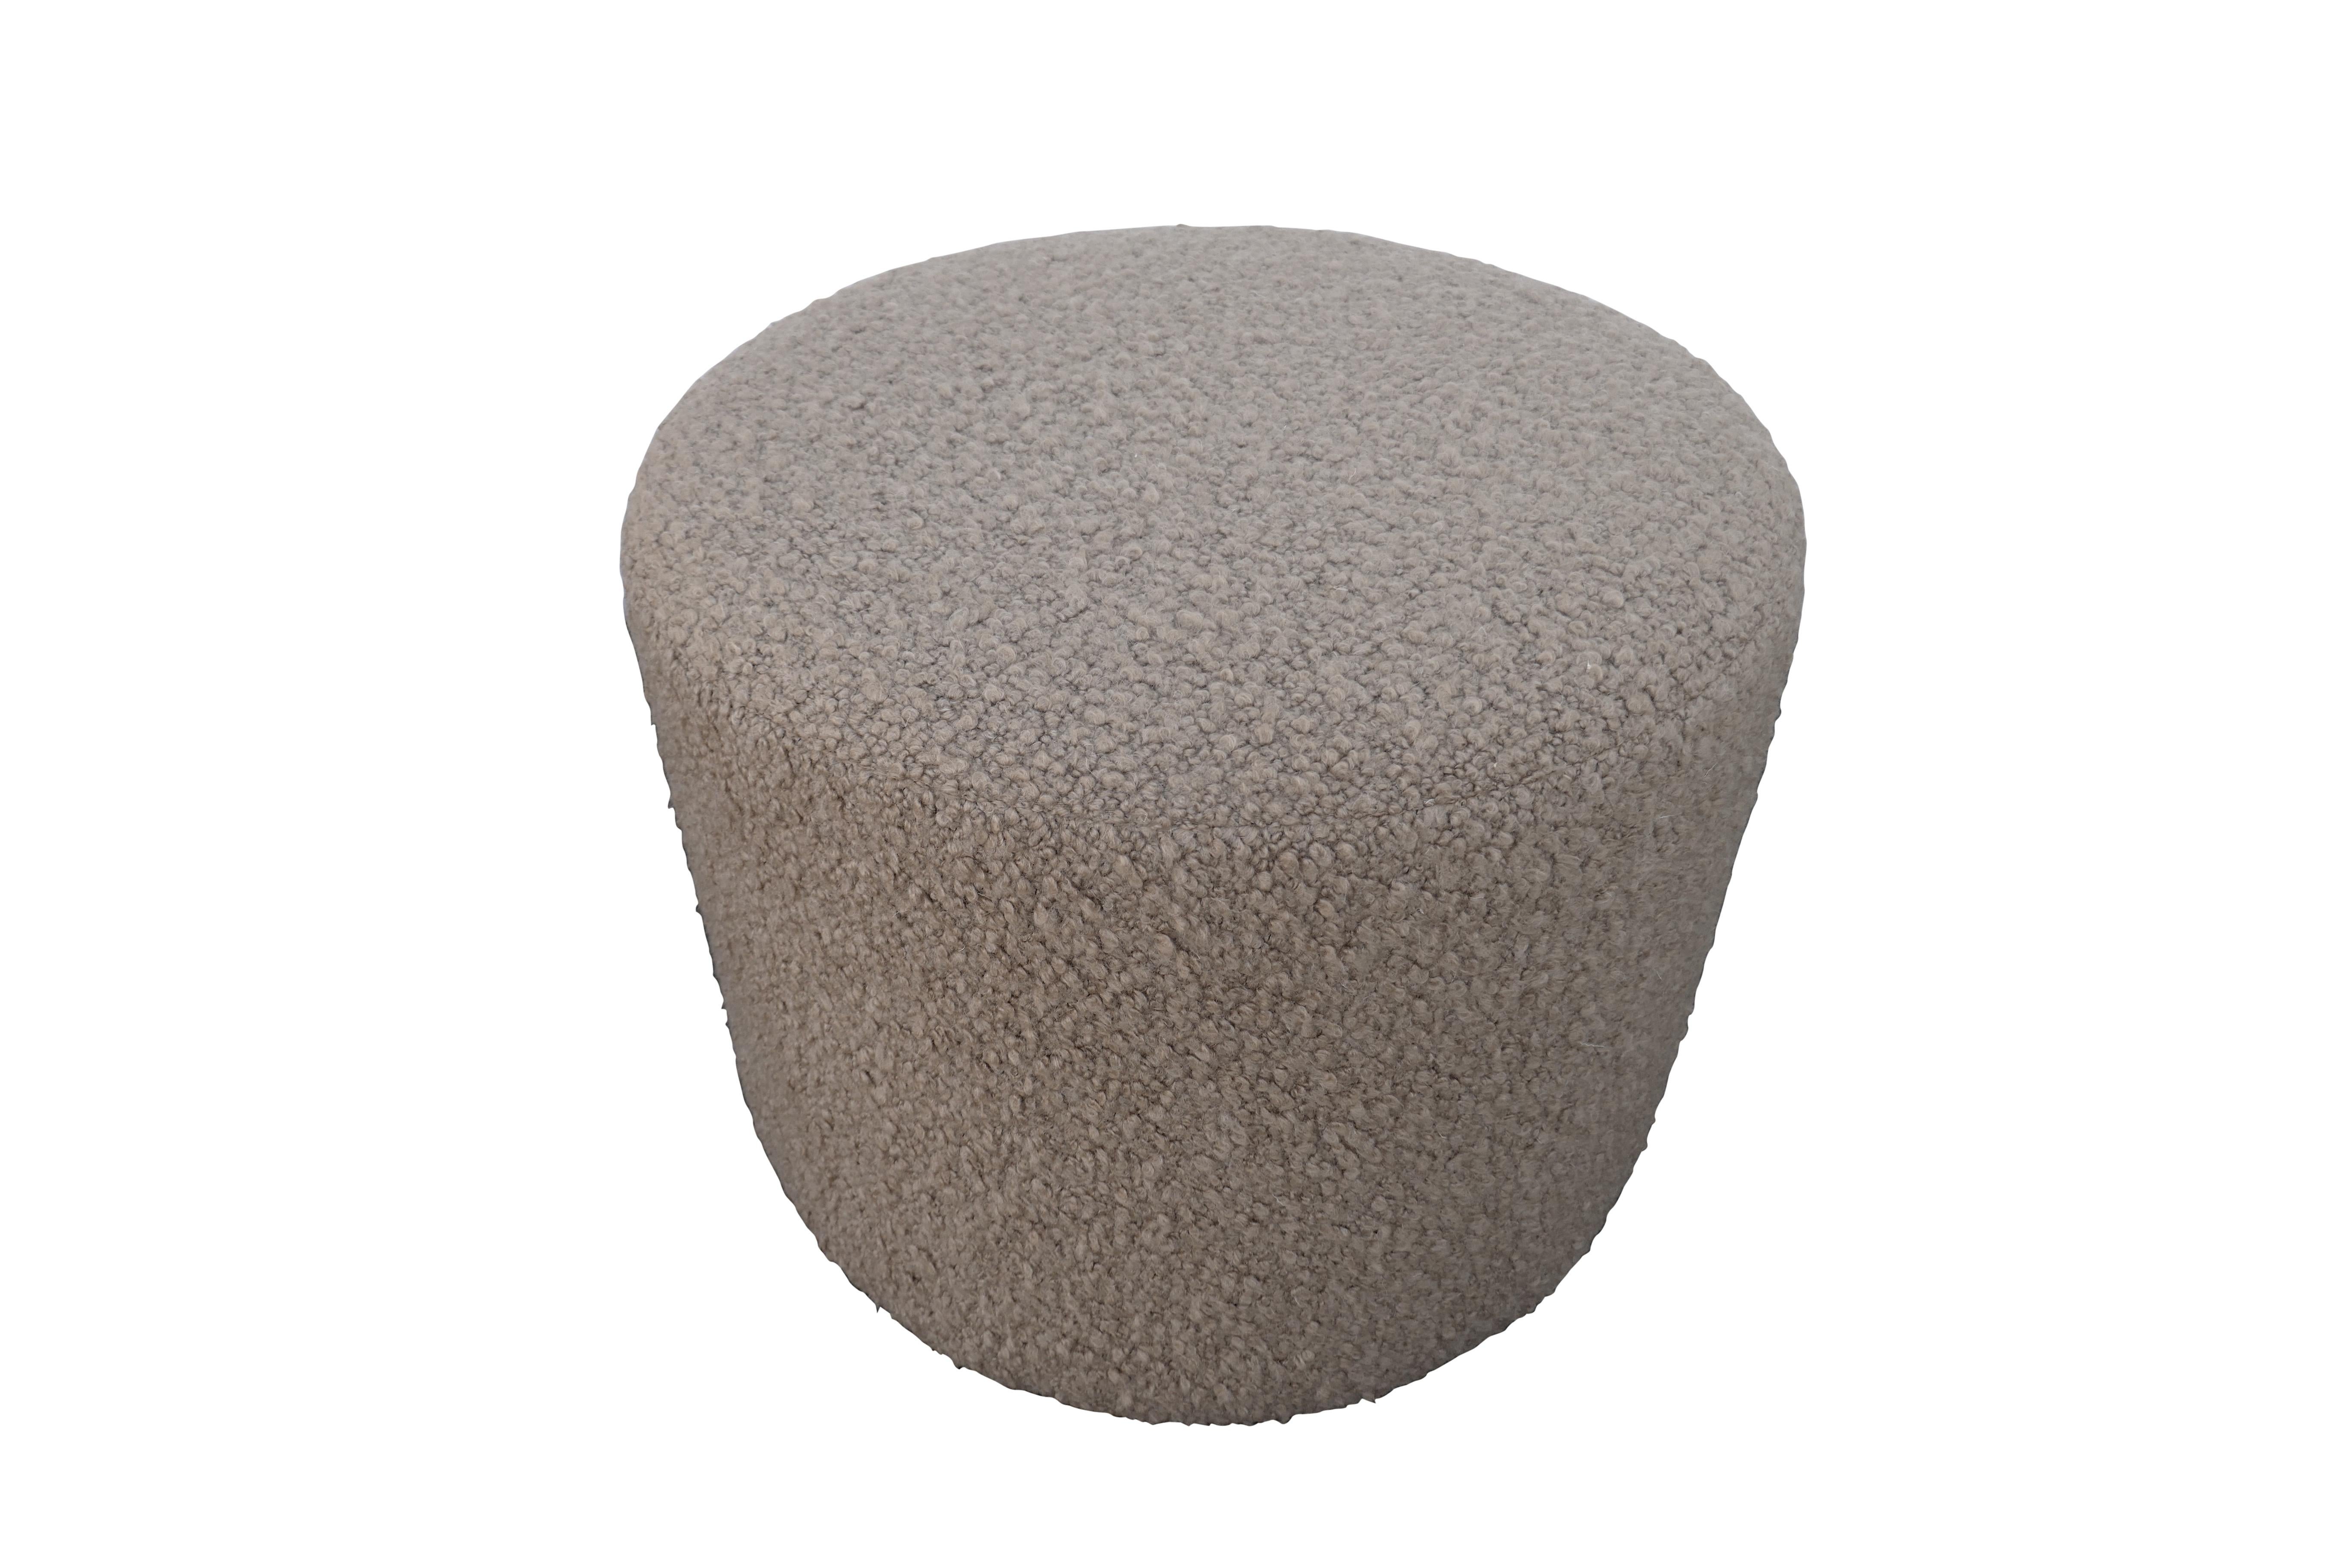 FI custom individually handcrafted cylinder style ottoman. As versatile as it is chic and luxurious. Created from ultra-luxe silky soft textural shearling textile, shown in Camel color way. Fully cushioned, solid wood inner-frame, superb quality.